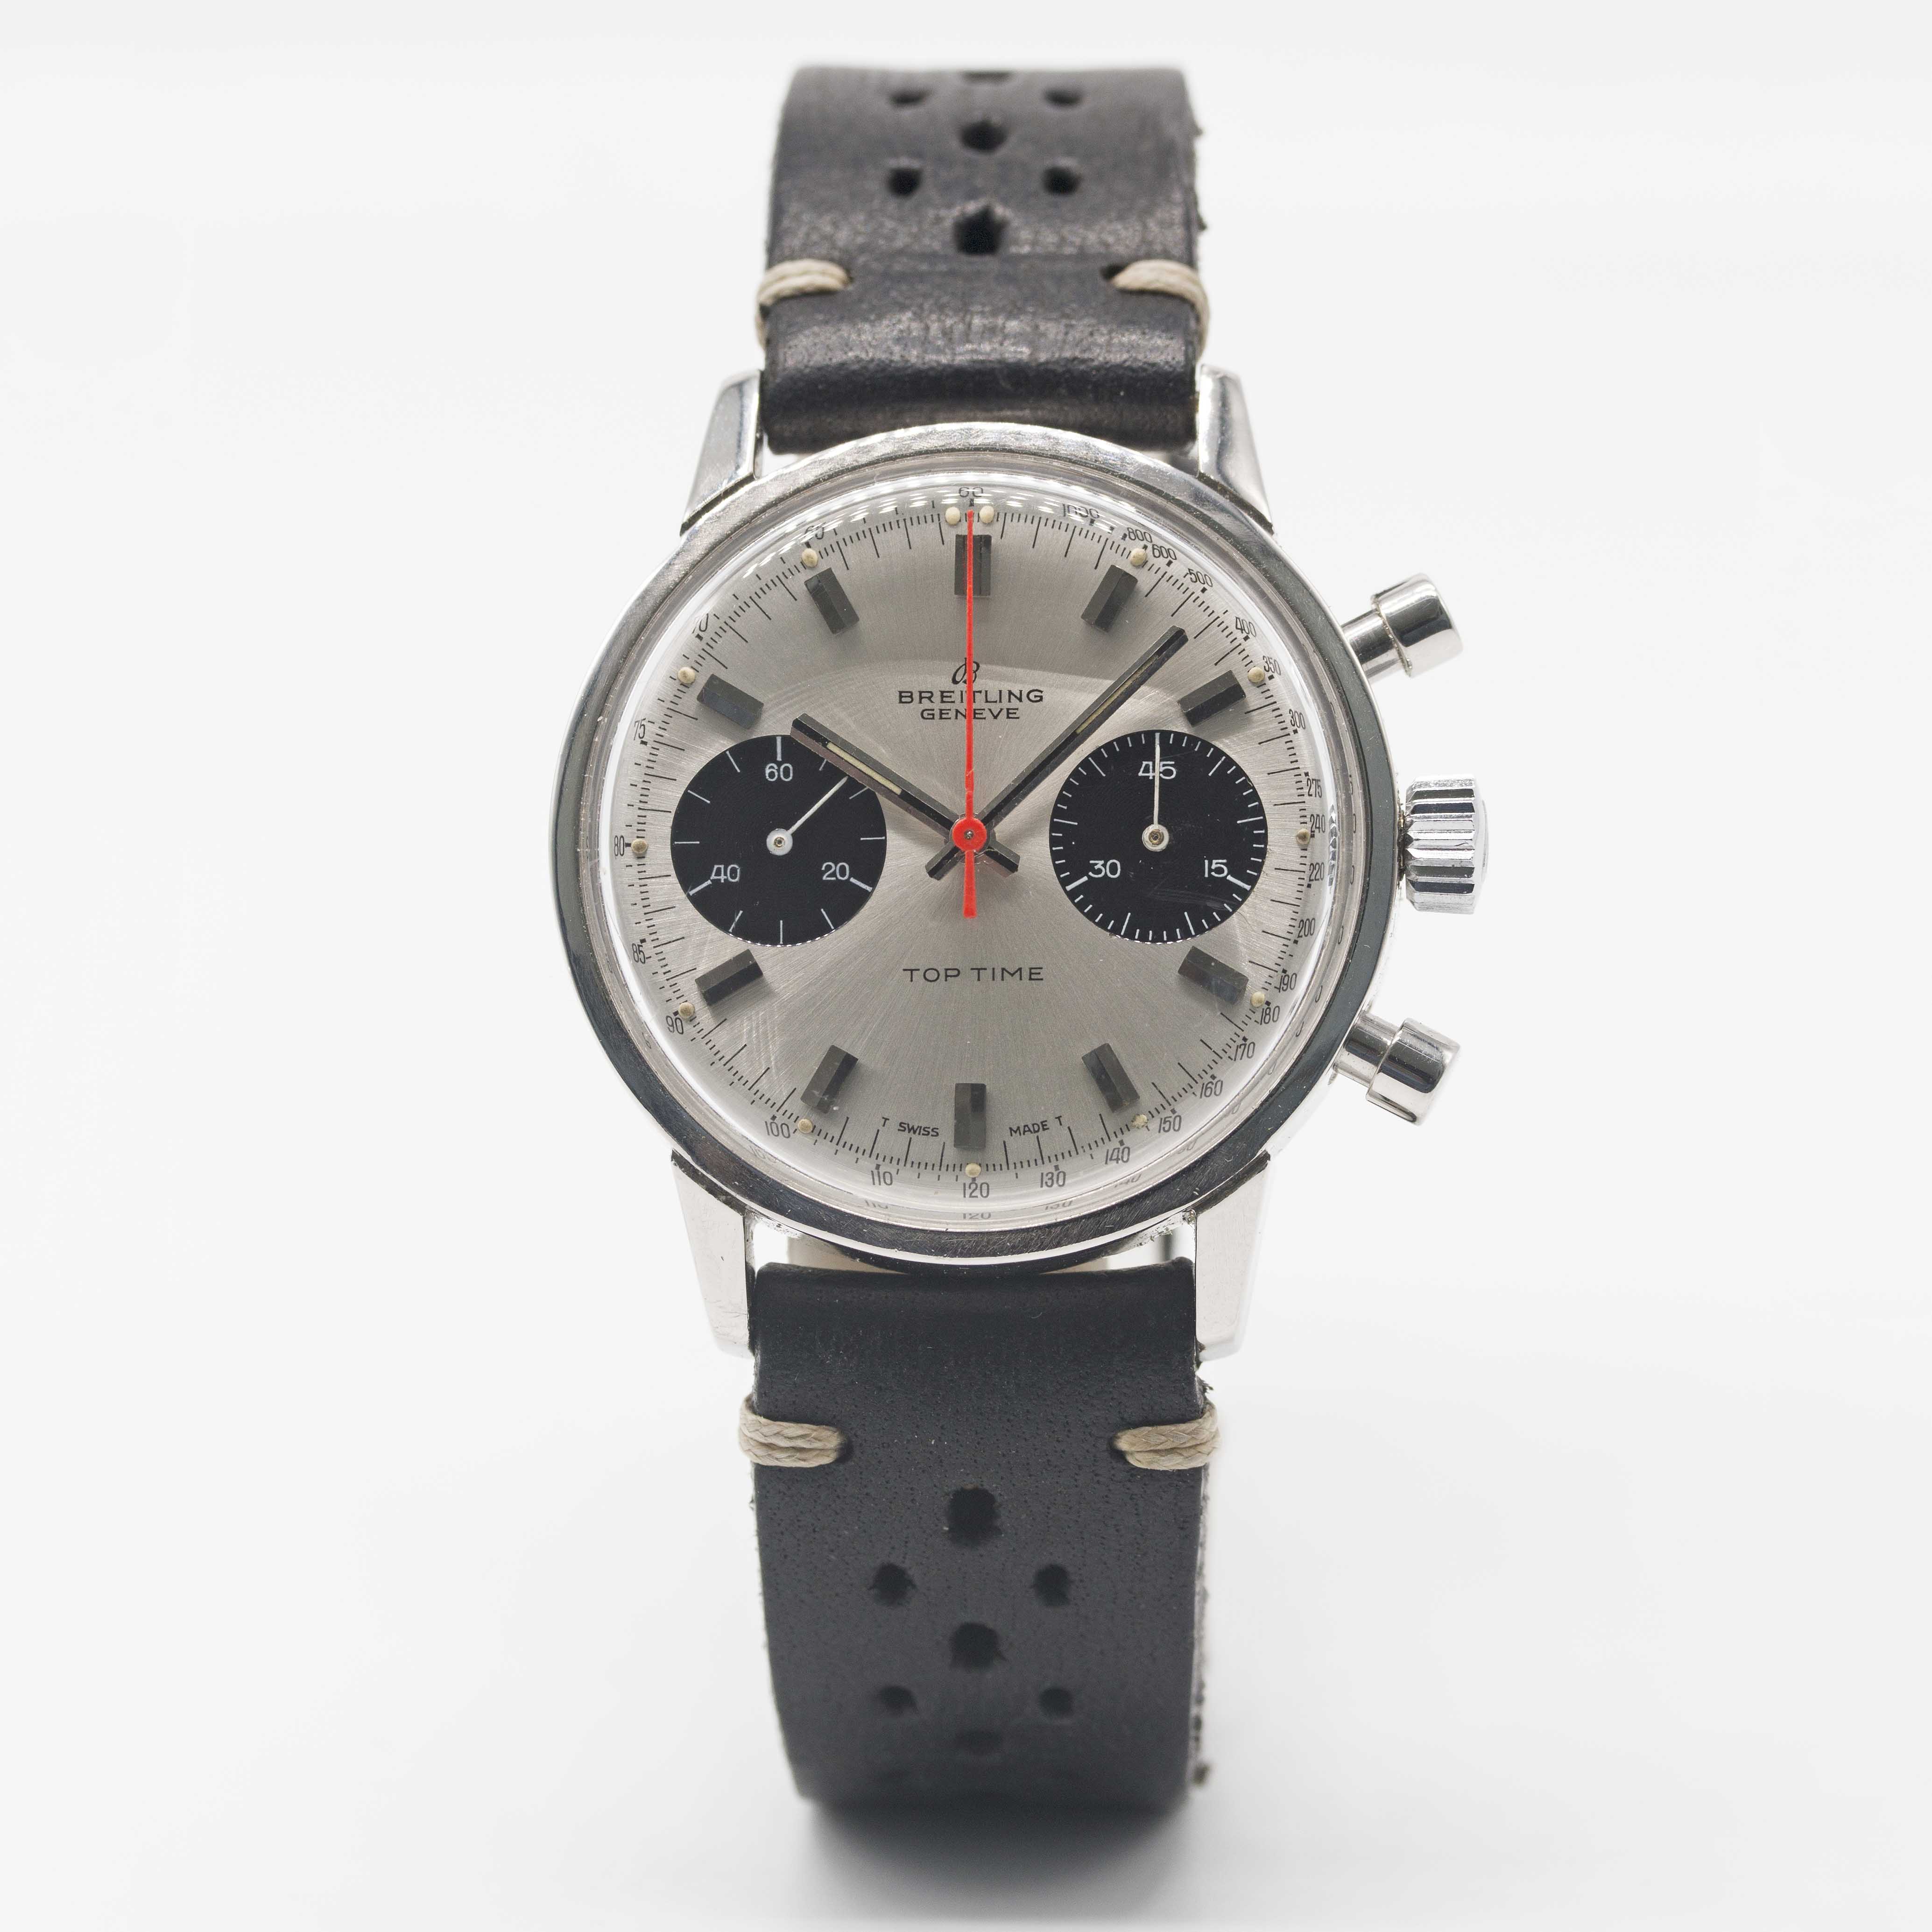 A GENTLEMAN'S STAINLESS STEEL BREITLING TOP TIME CHRONOGRAPH WRIST WATCH CIRCA 1969, REF. 2002-33 - Image 2 of 9